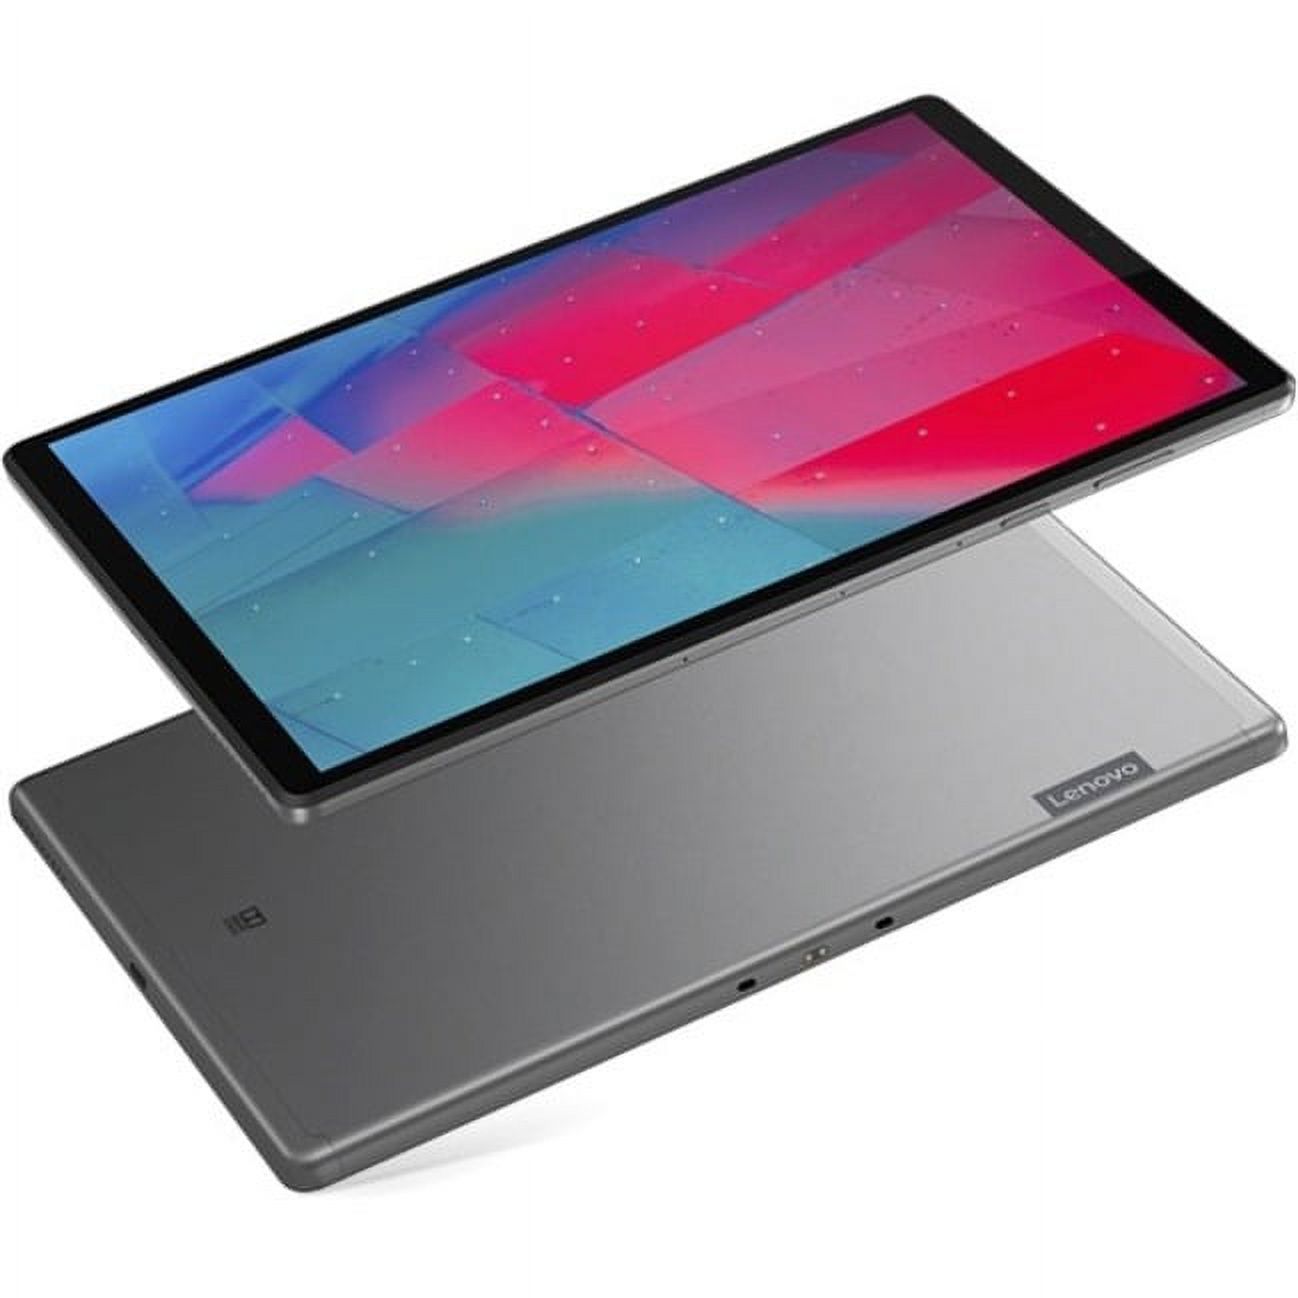 Lenovo Tab M10 10.3" Tablet - MediaTek Helio P22T - 4GB - 64GB FHD Plus with the Smart Charging Station - Android 9.0 (Pie) - image 9 of 33